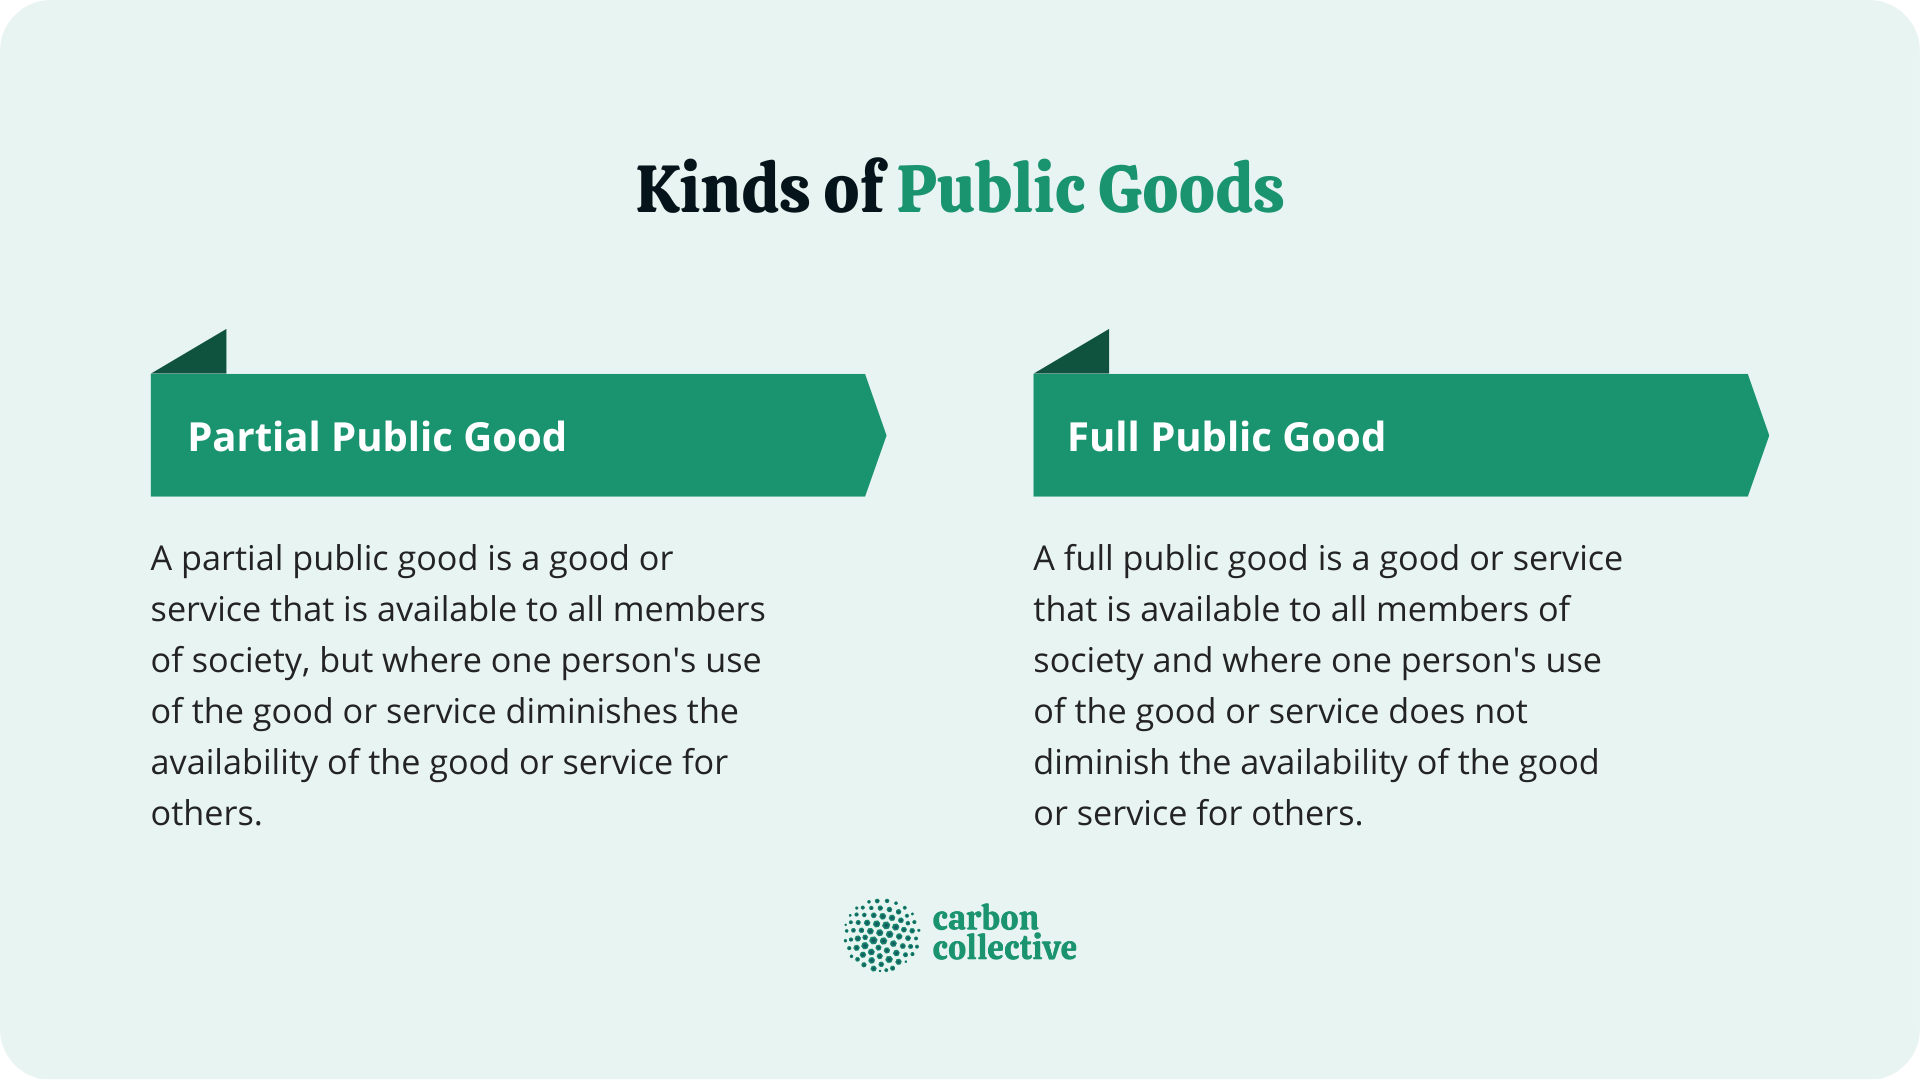 https://www.carboncollective.co/hs-fs/hubfs/Kinds_of_Public_Goods.png?width=1920&height=1080&name=Kinds_of_Public_Goods.png